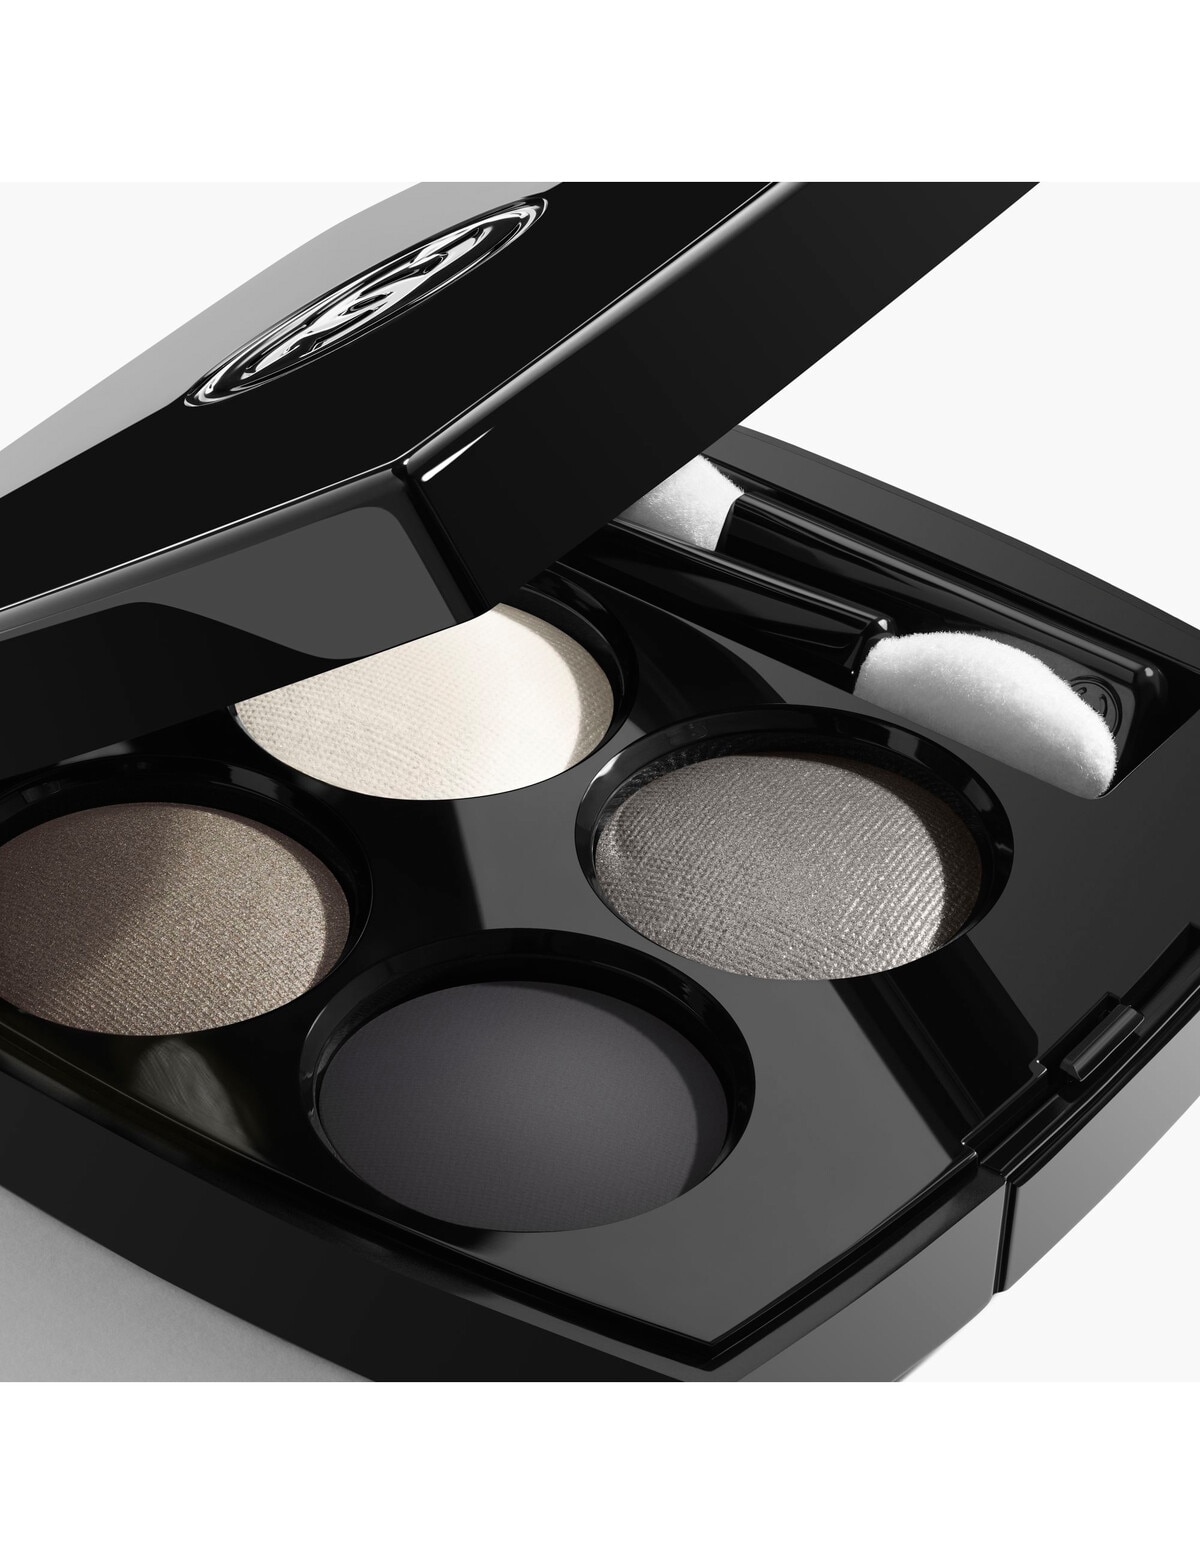 Chanel Les 4 Ombres Quadra Eye Shadow - No. 308 Clair Obscur